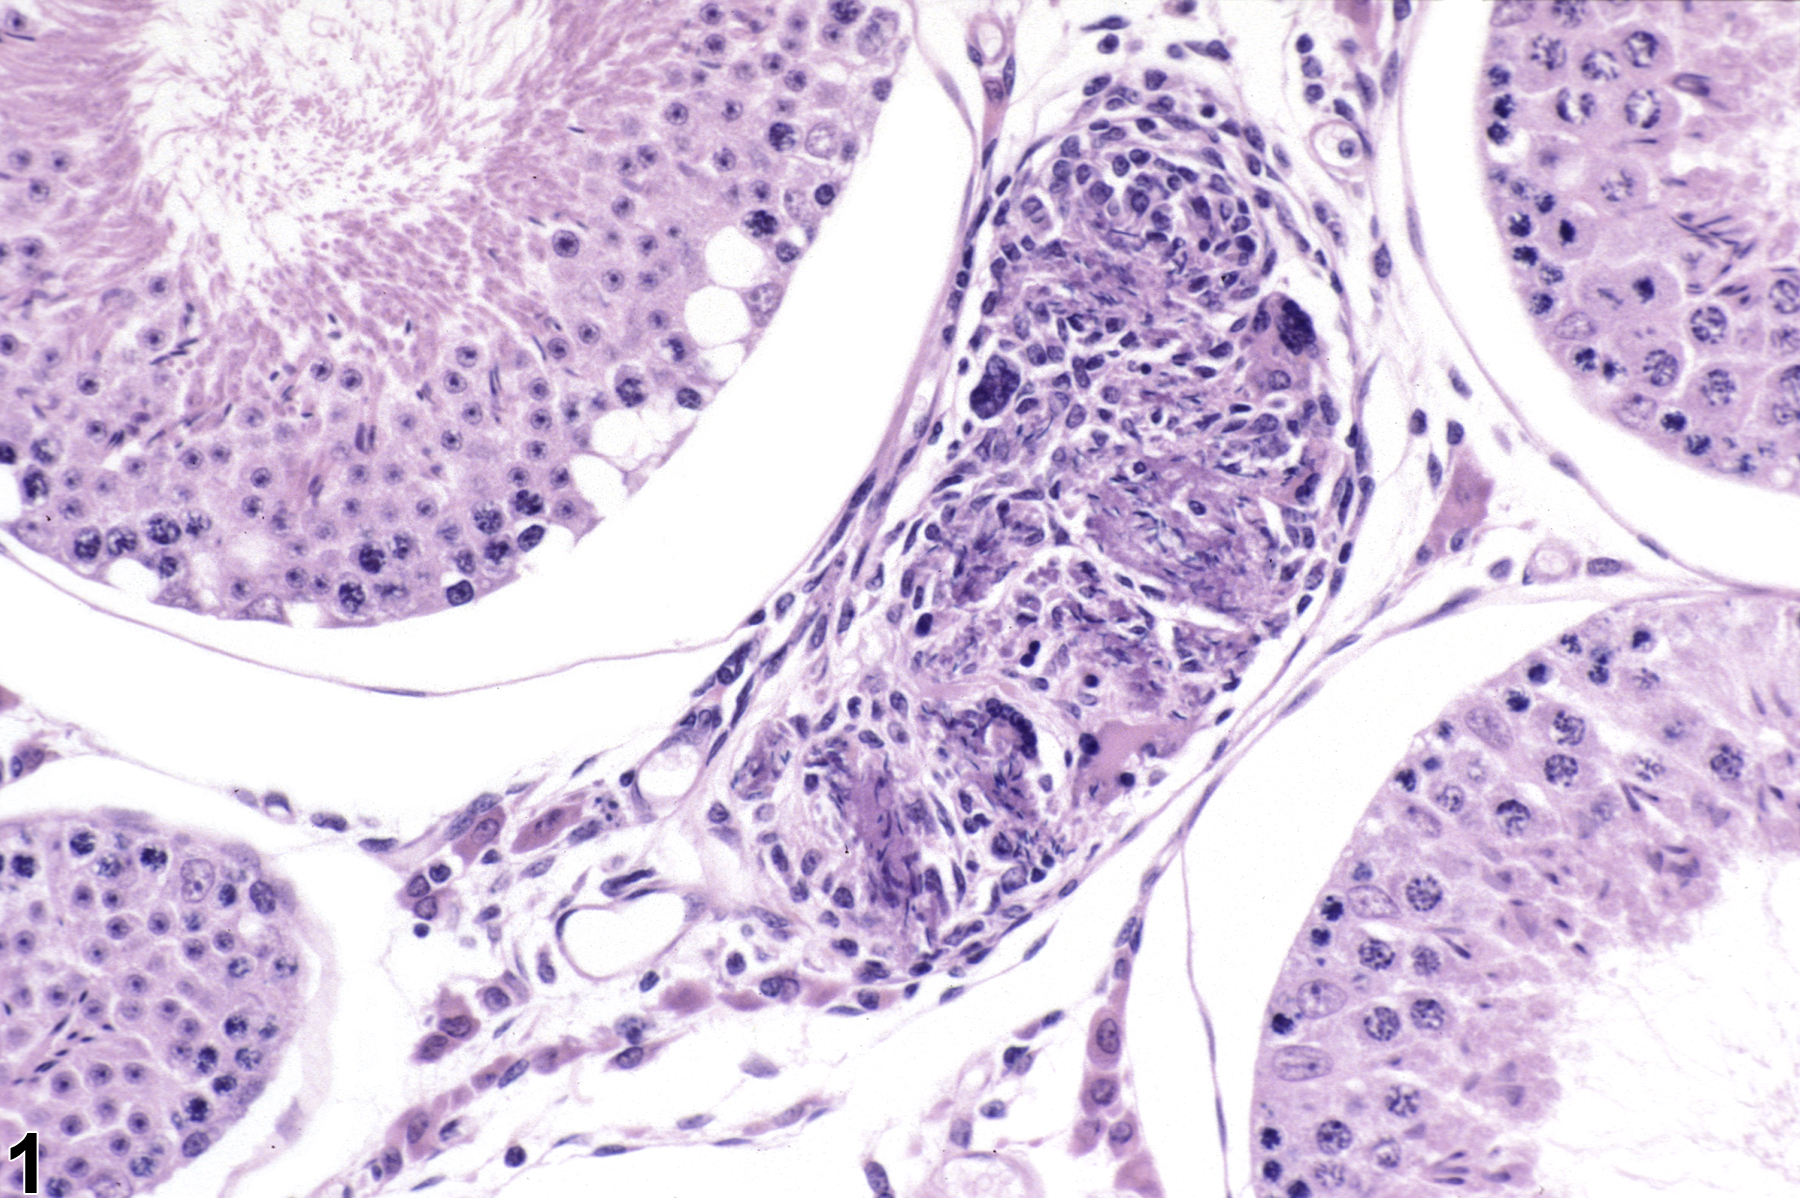 Image of sperm granuloma in the testis from a male hamster in a subchronic study